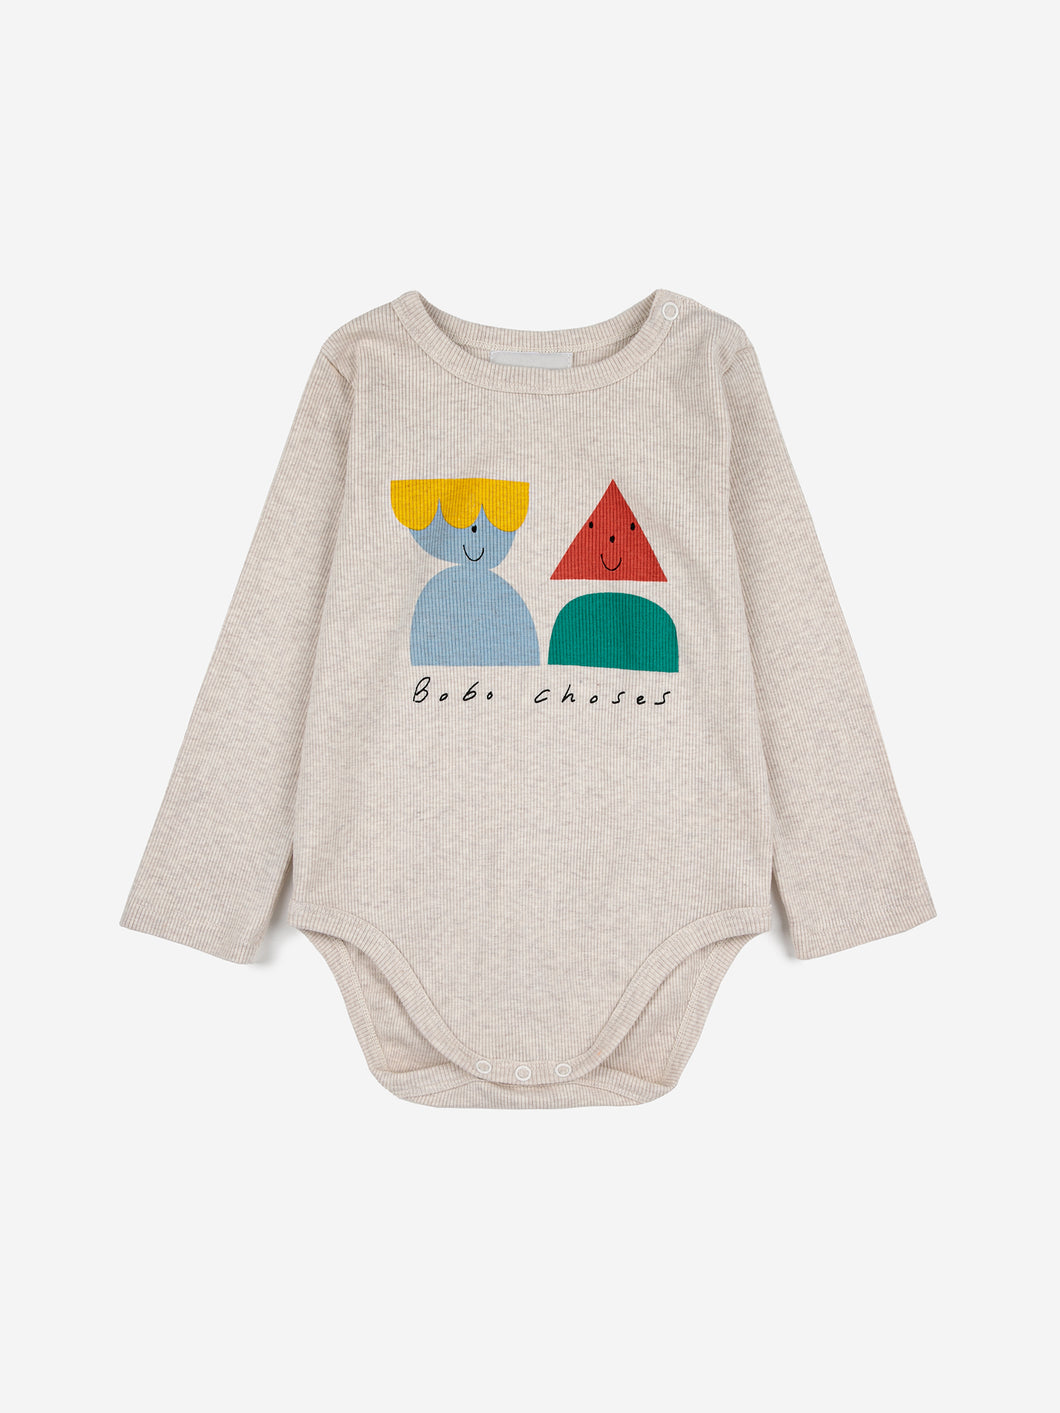 Baby Funny Friends body 23AW / ボボショーズ ベビーロンパース 長袖 ロゴ